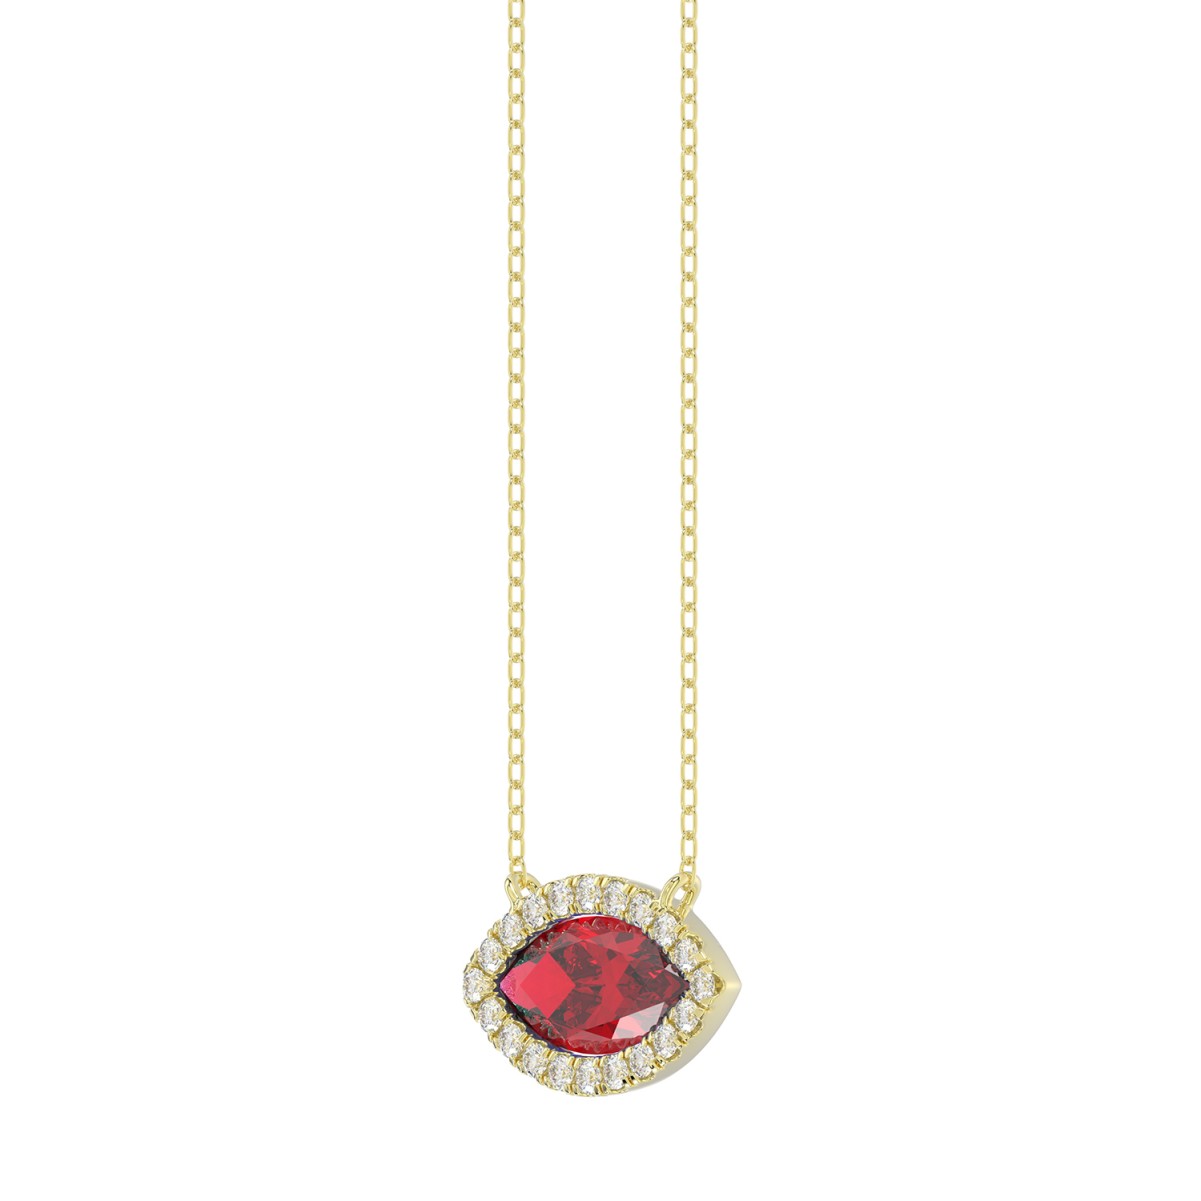 18K YELLOW GOLD 3/4CT ROUND/MARQUISE DIAMOND LADIES NECKLACE (COLOR STONE MARQUISE RUBY DIAMOND 3/4CT)